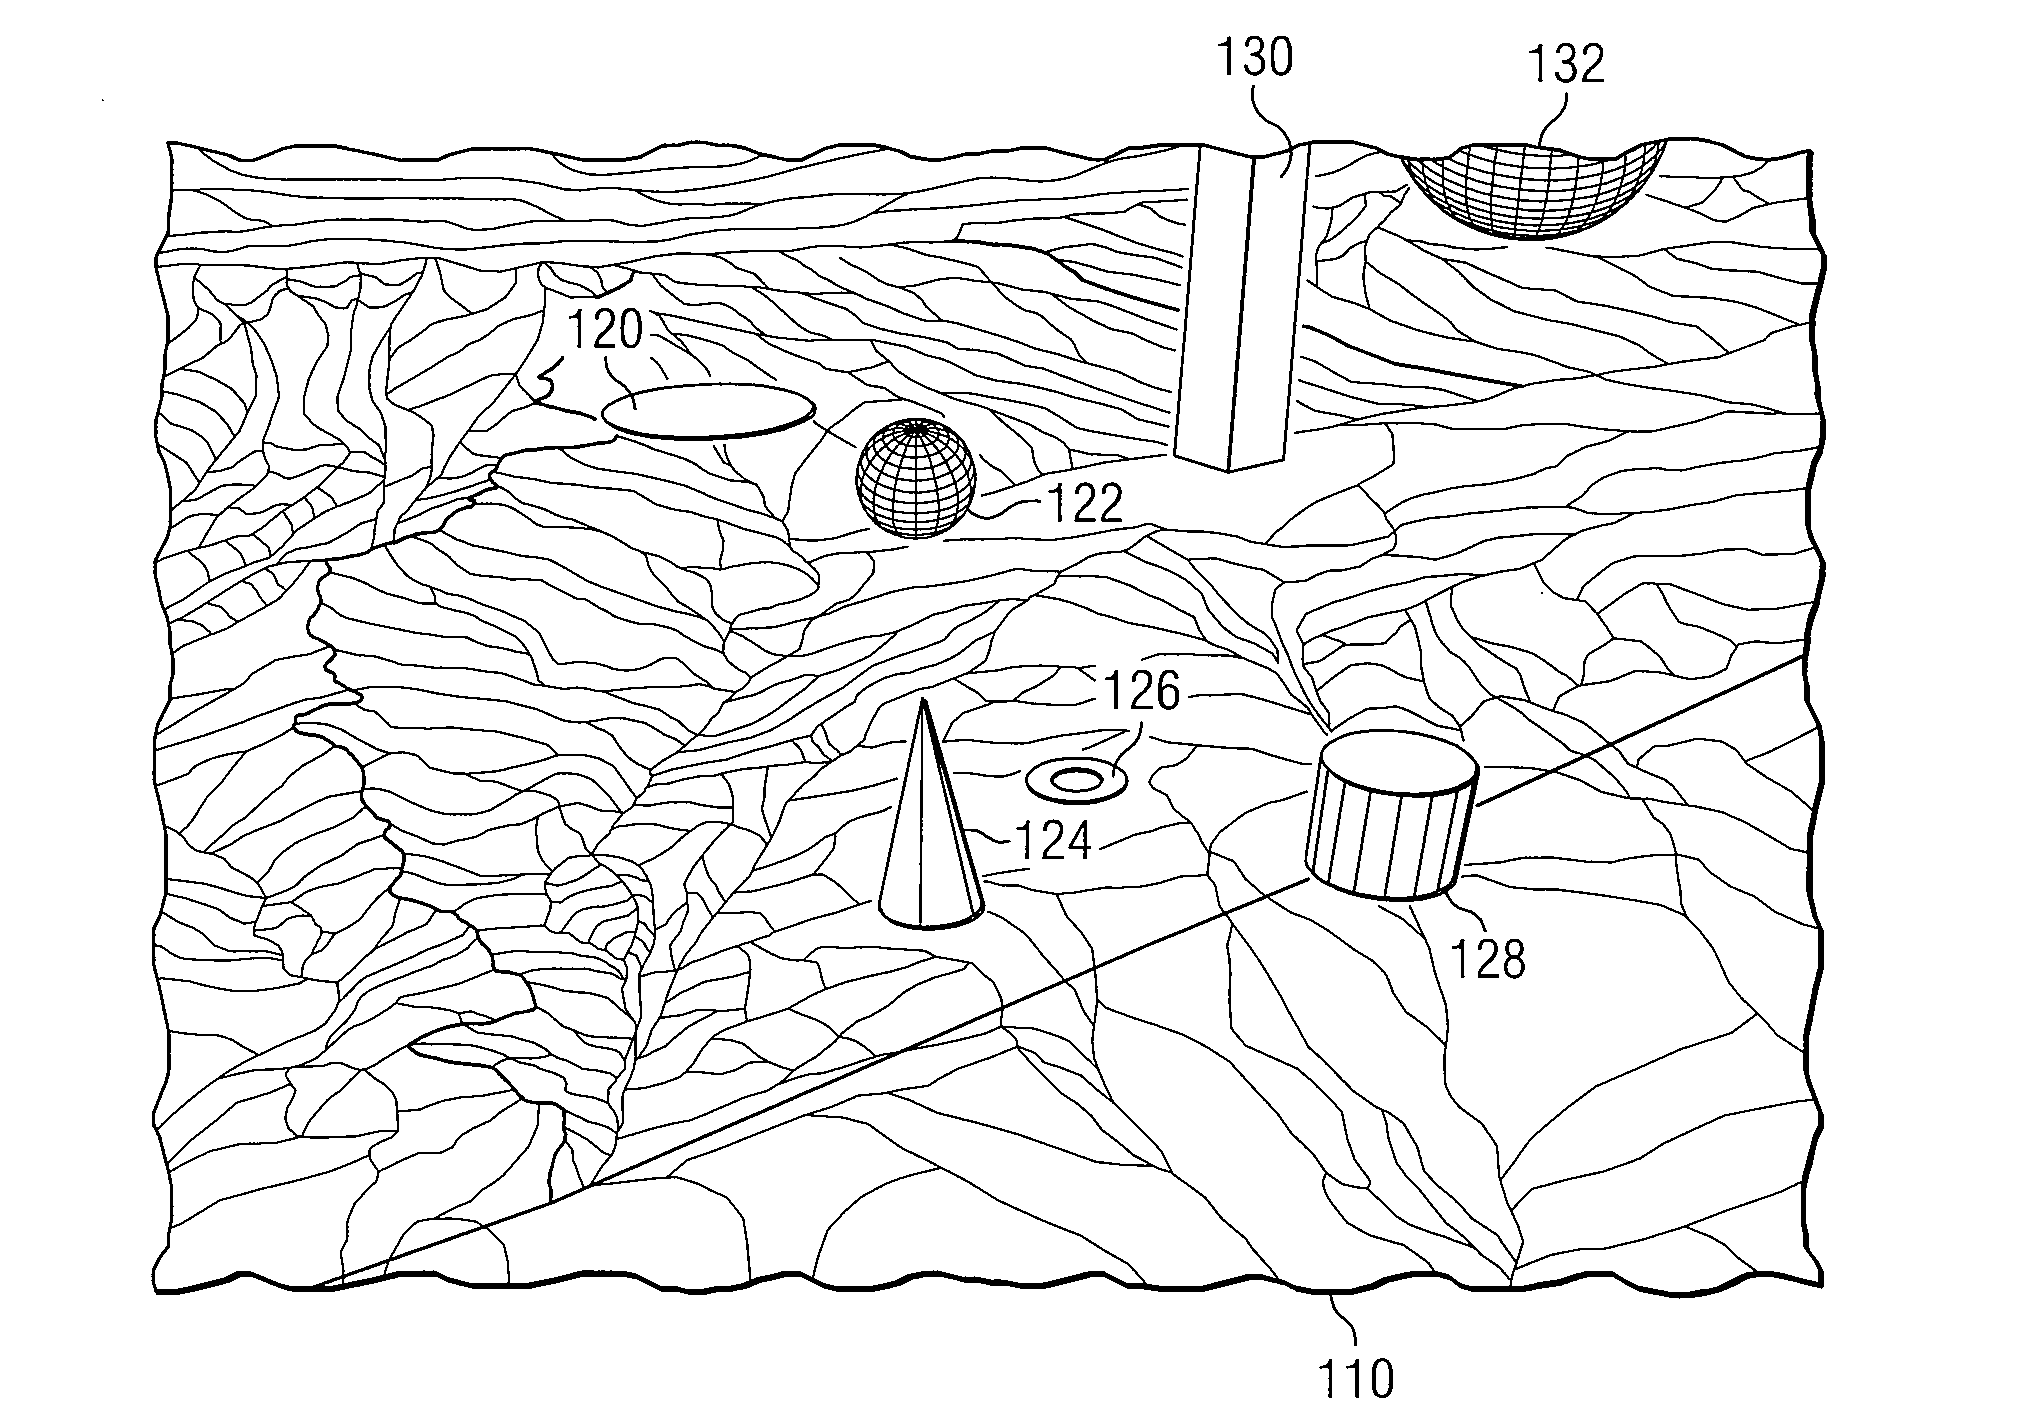 Method and System for Displaying Graphical Objects on a Digital Map